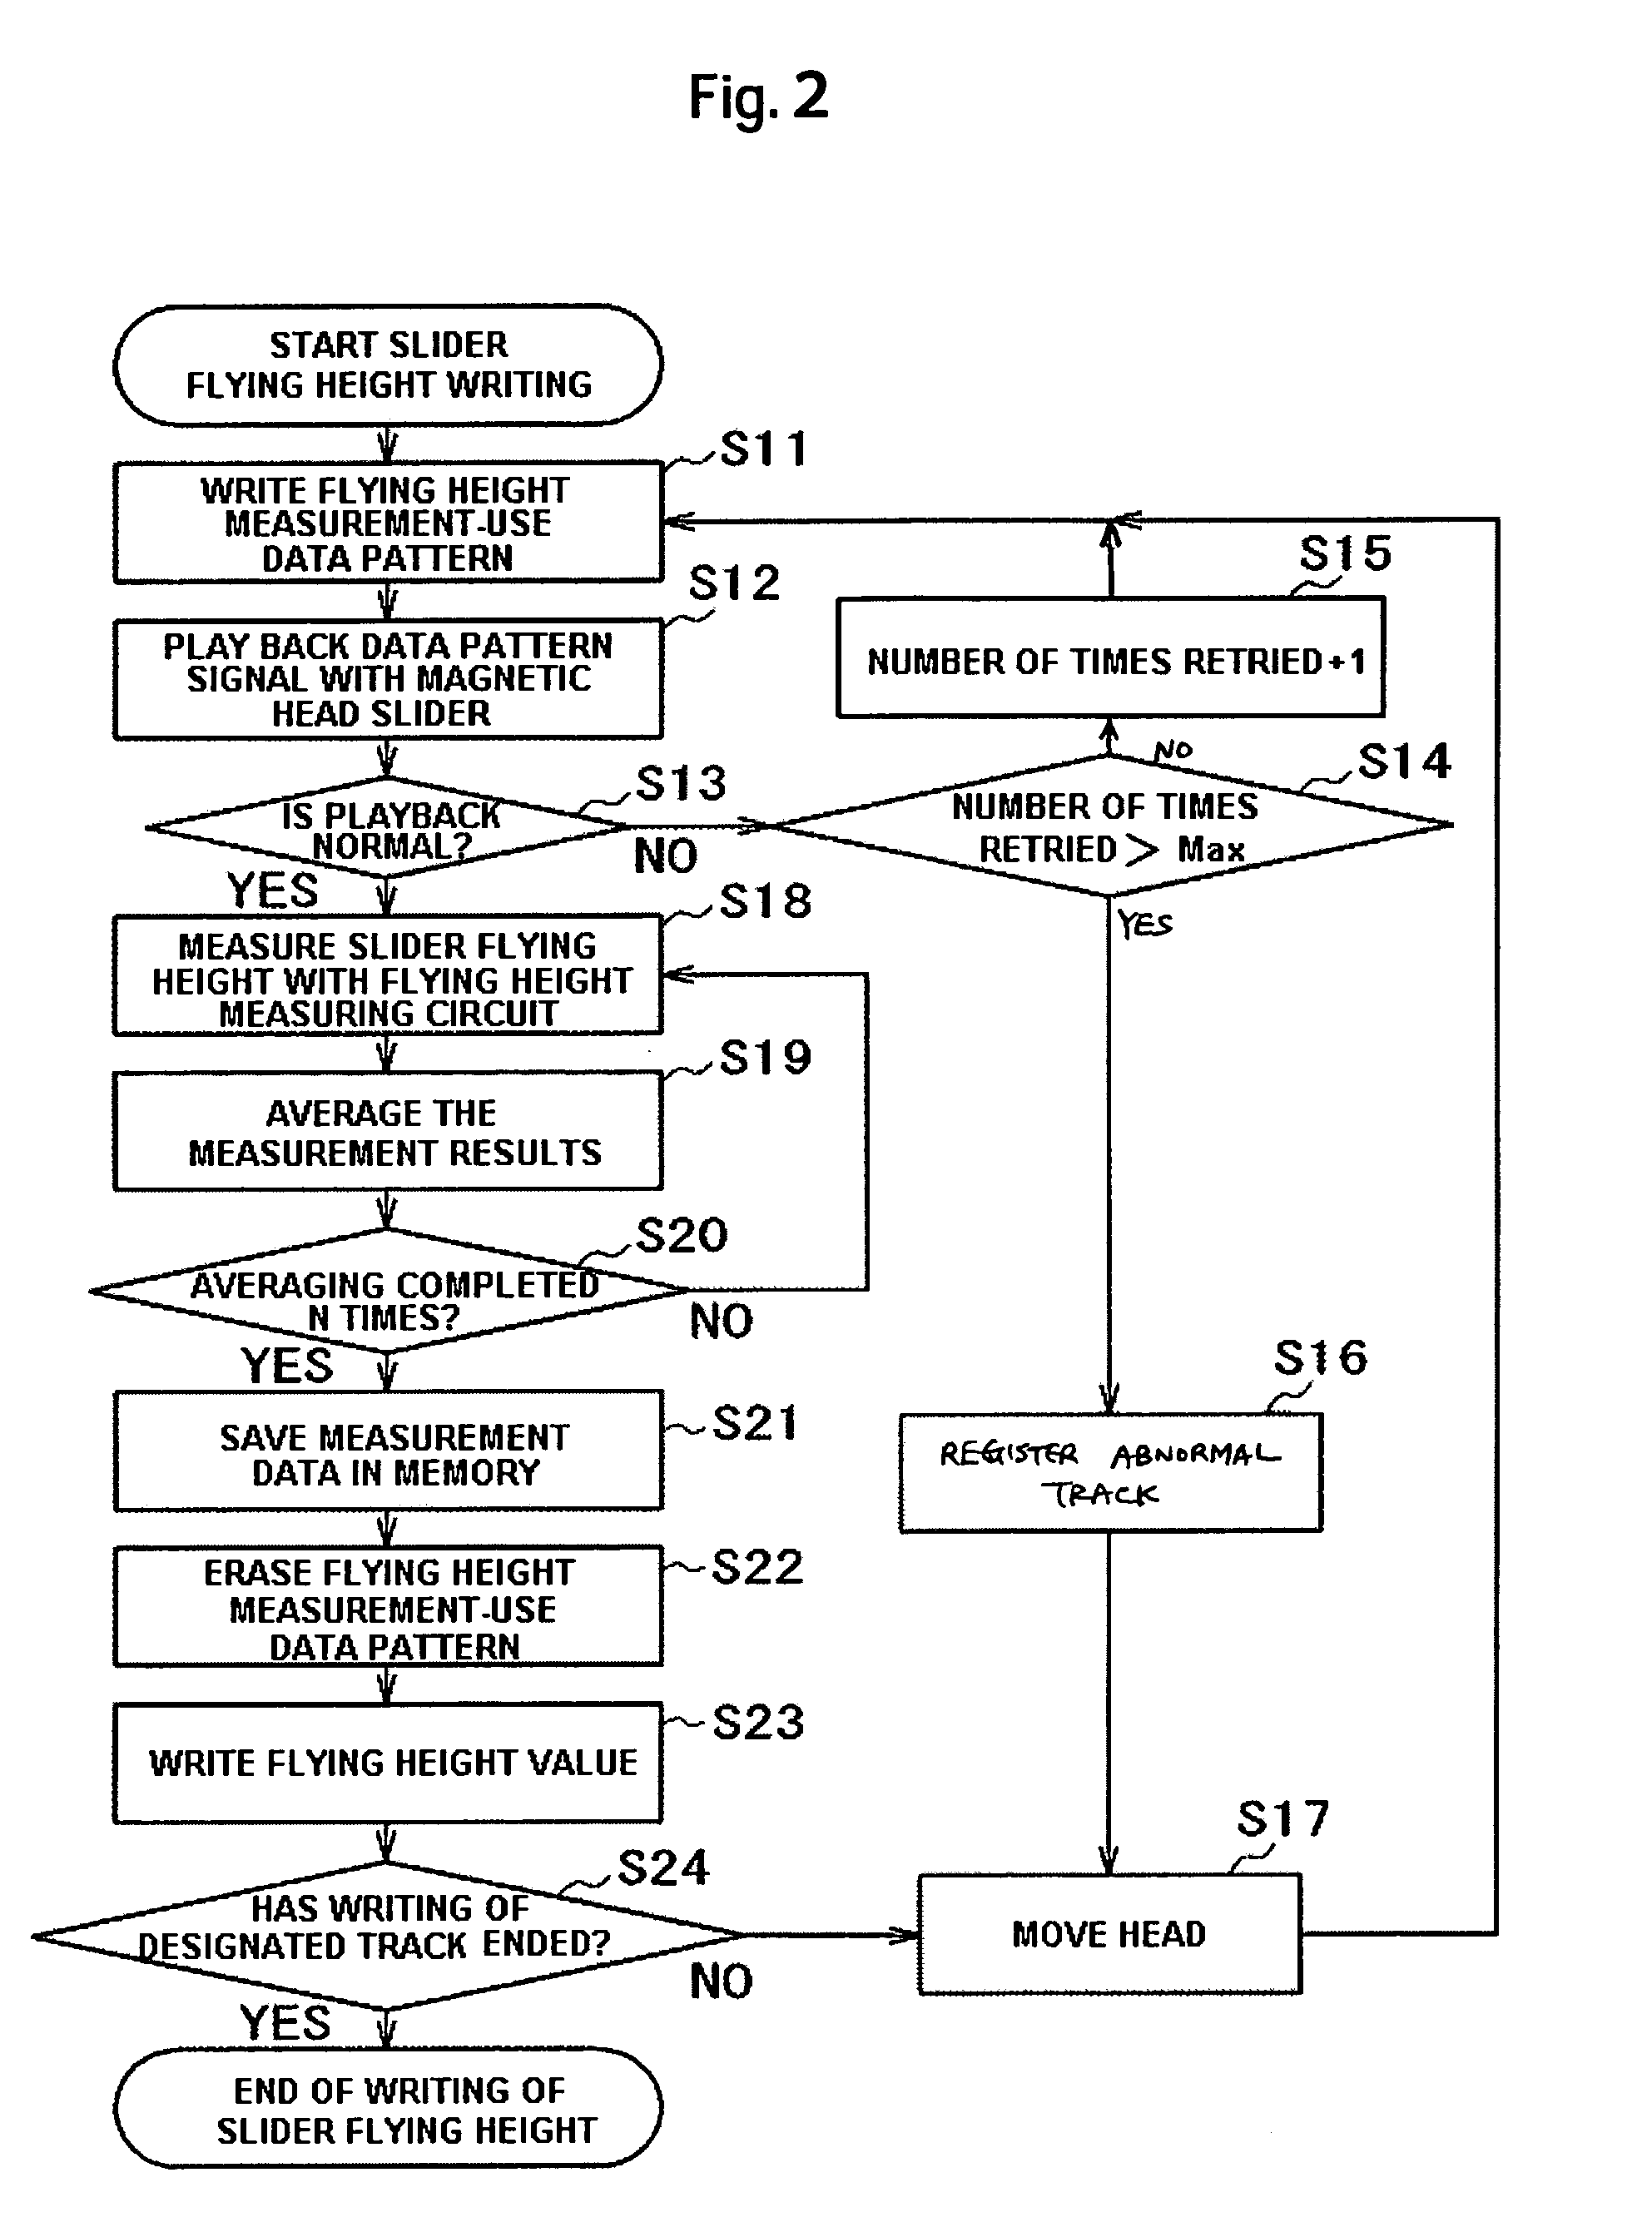 Controlling head flying height in a data storage device